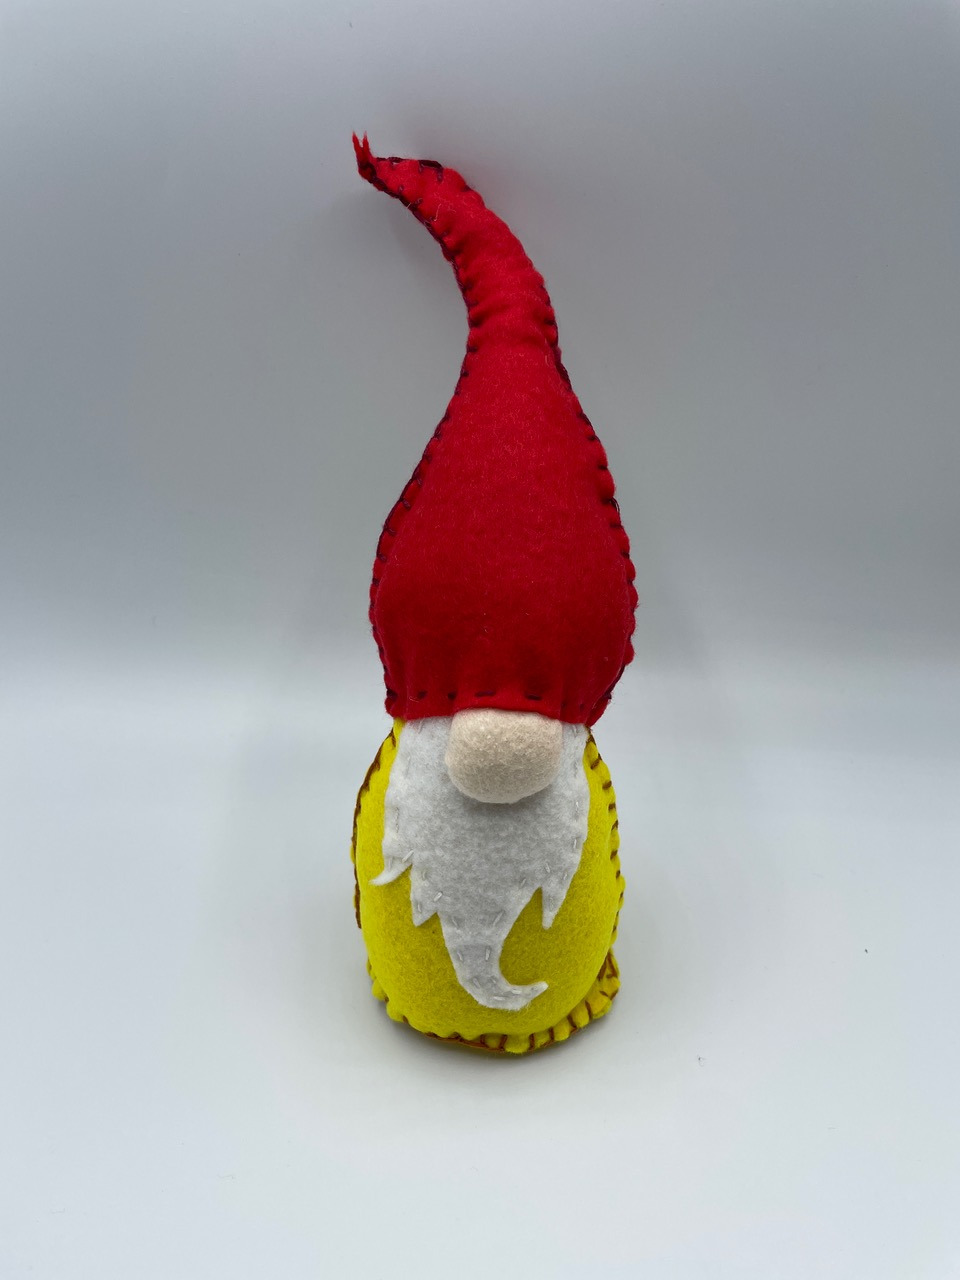 A color photo of a gnome made from felt with a red hat and yellow body.